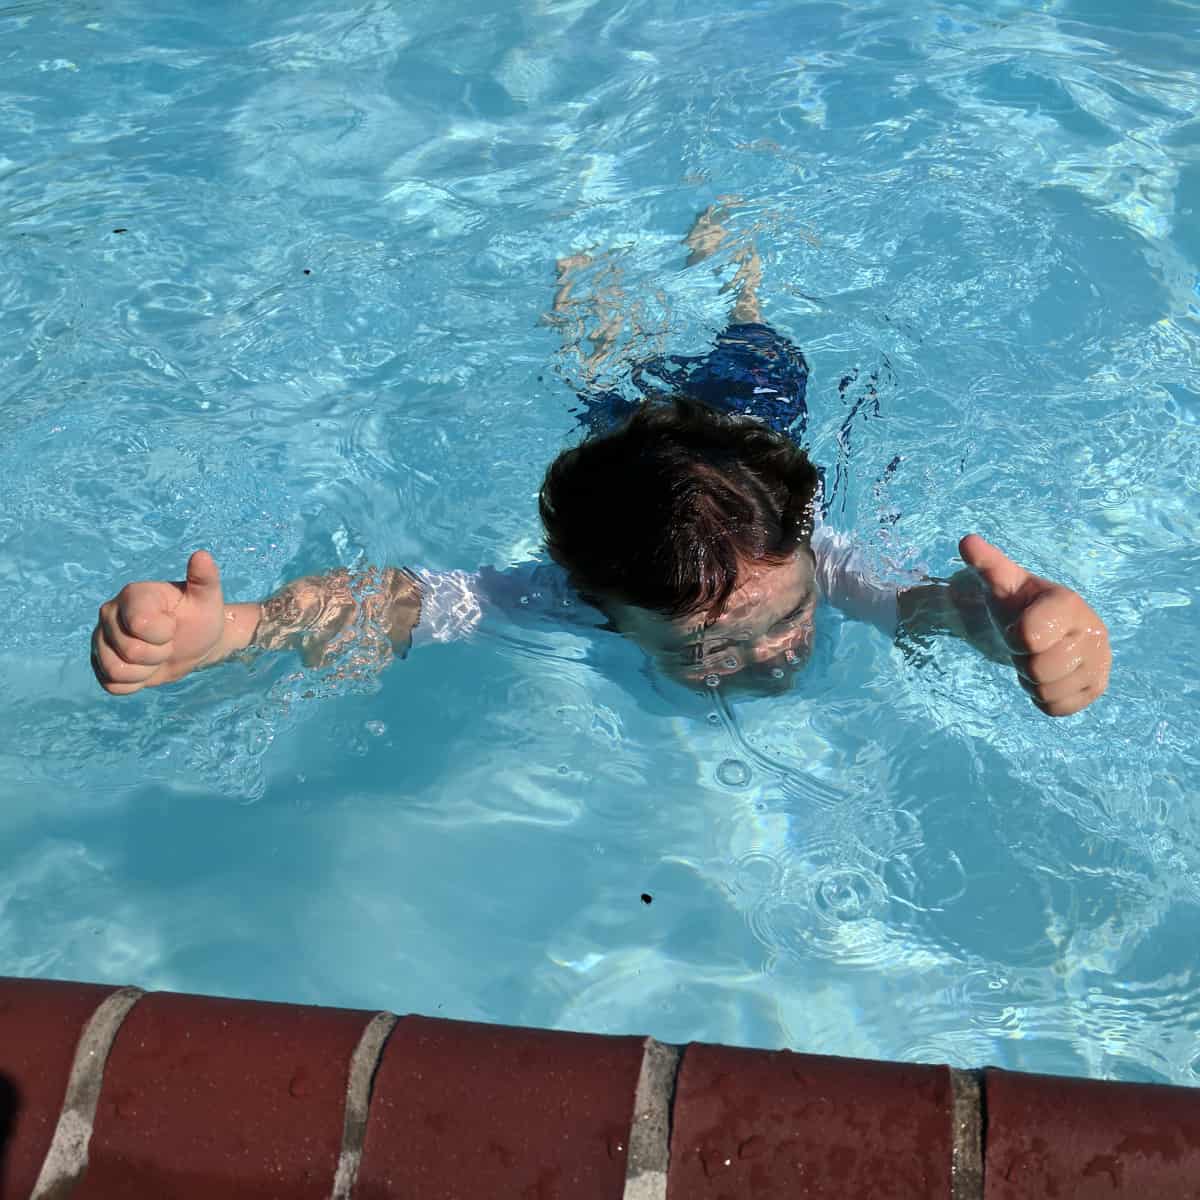 Thumbs Up in the Pool